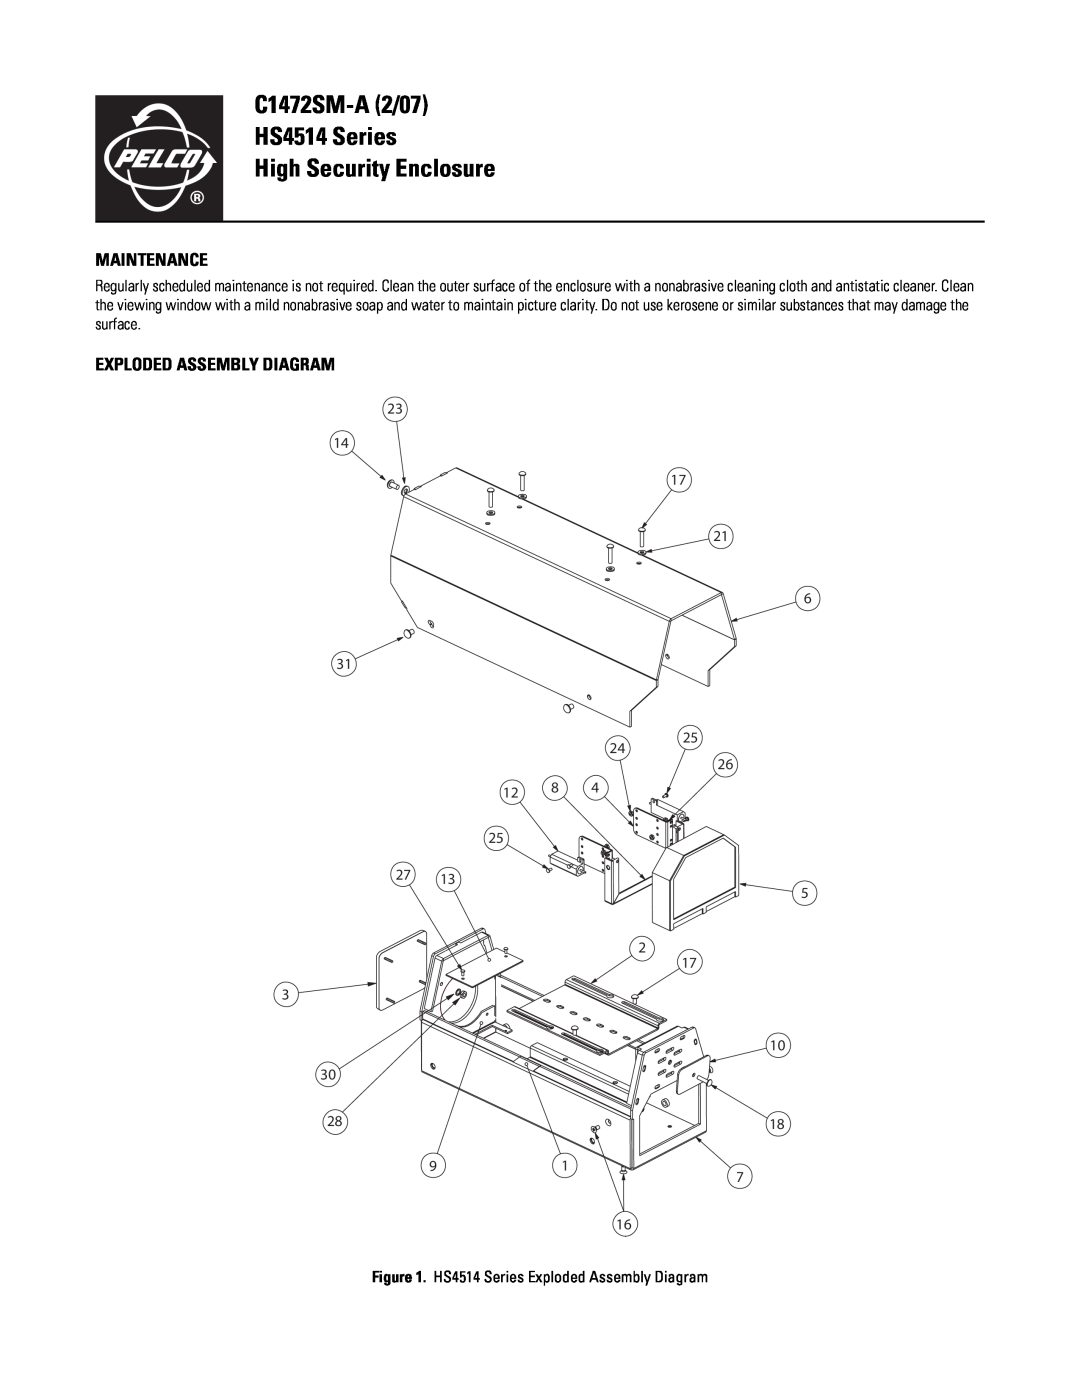 Pelco manual Maintenance, Exploded Assembly Diagram, C1472SM-A2/07 HS4514 Series, High Security Enclosure 